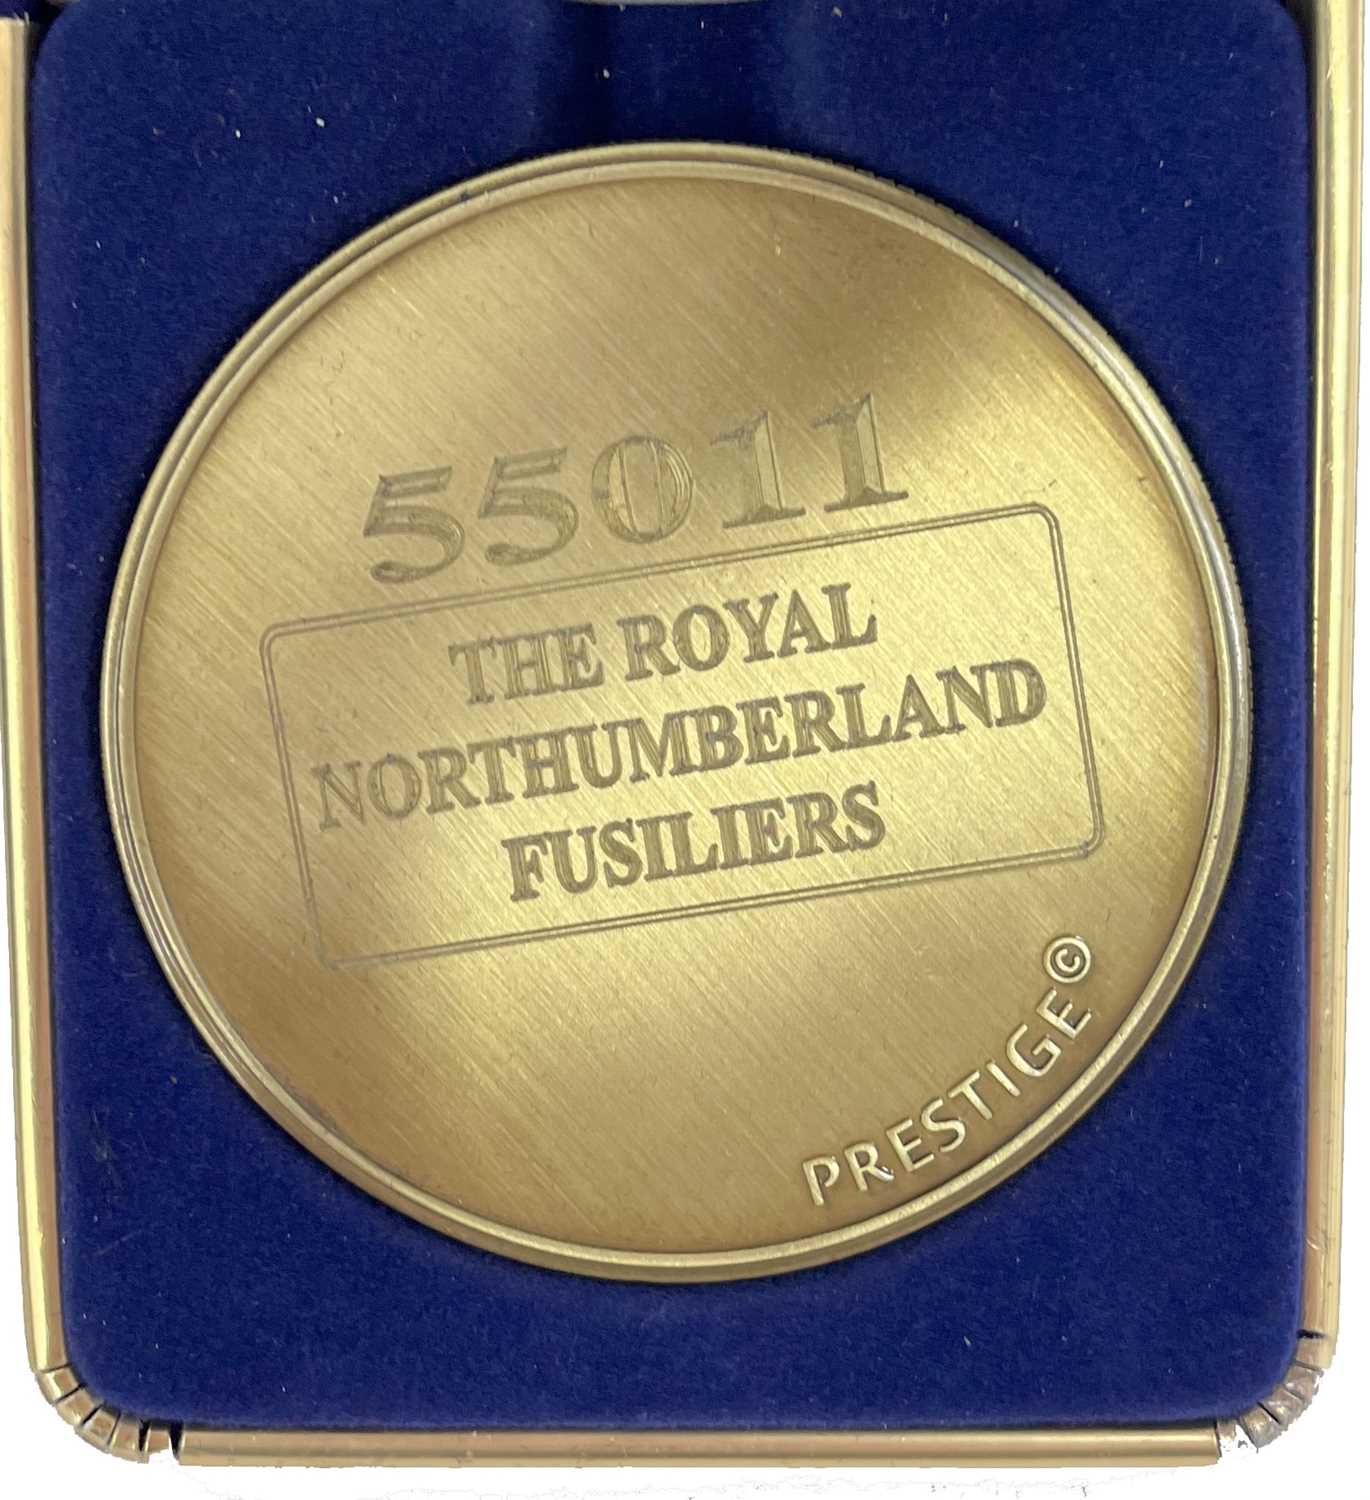 A commemorative gold award medallion to 55011 The Royal Northumberland